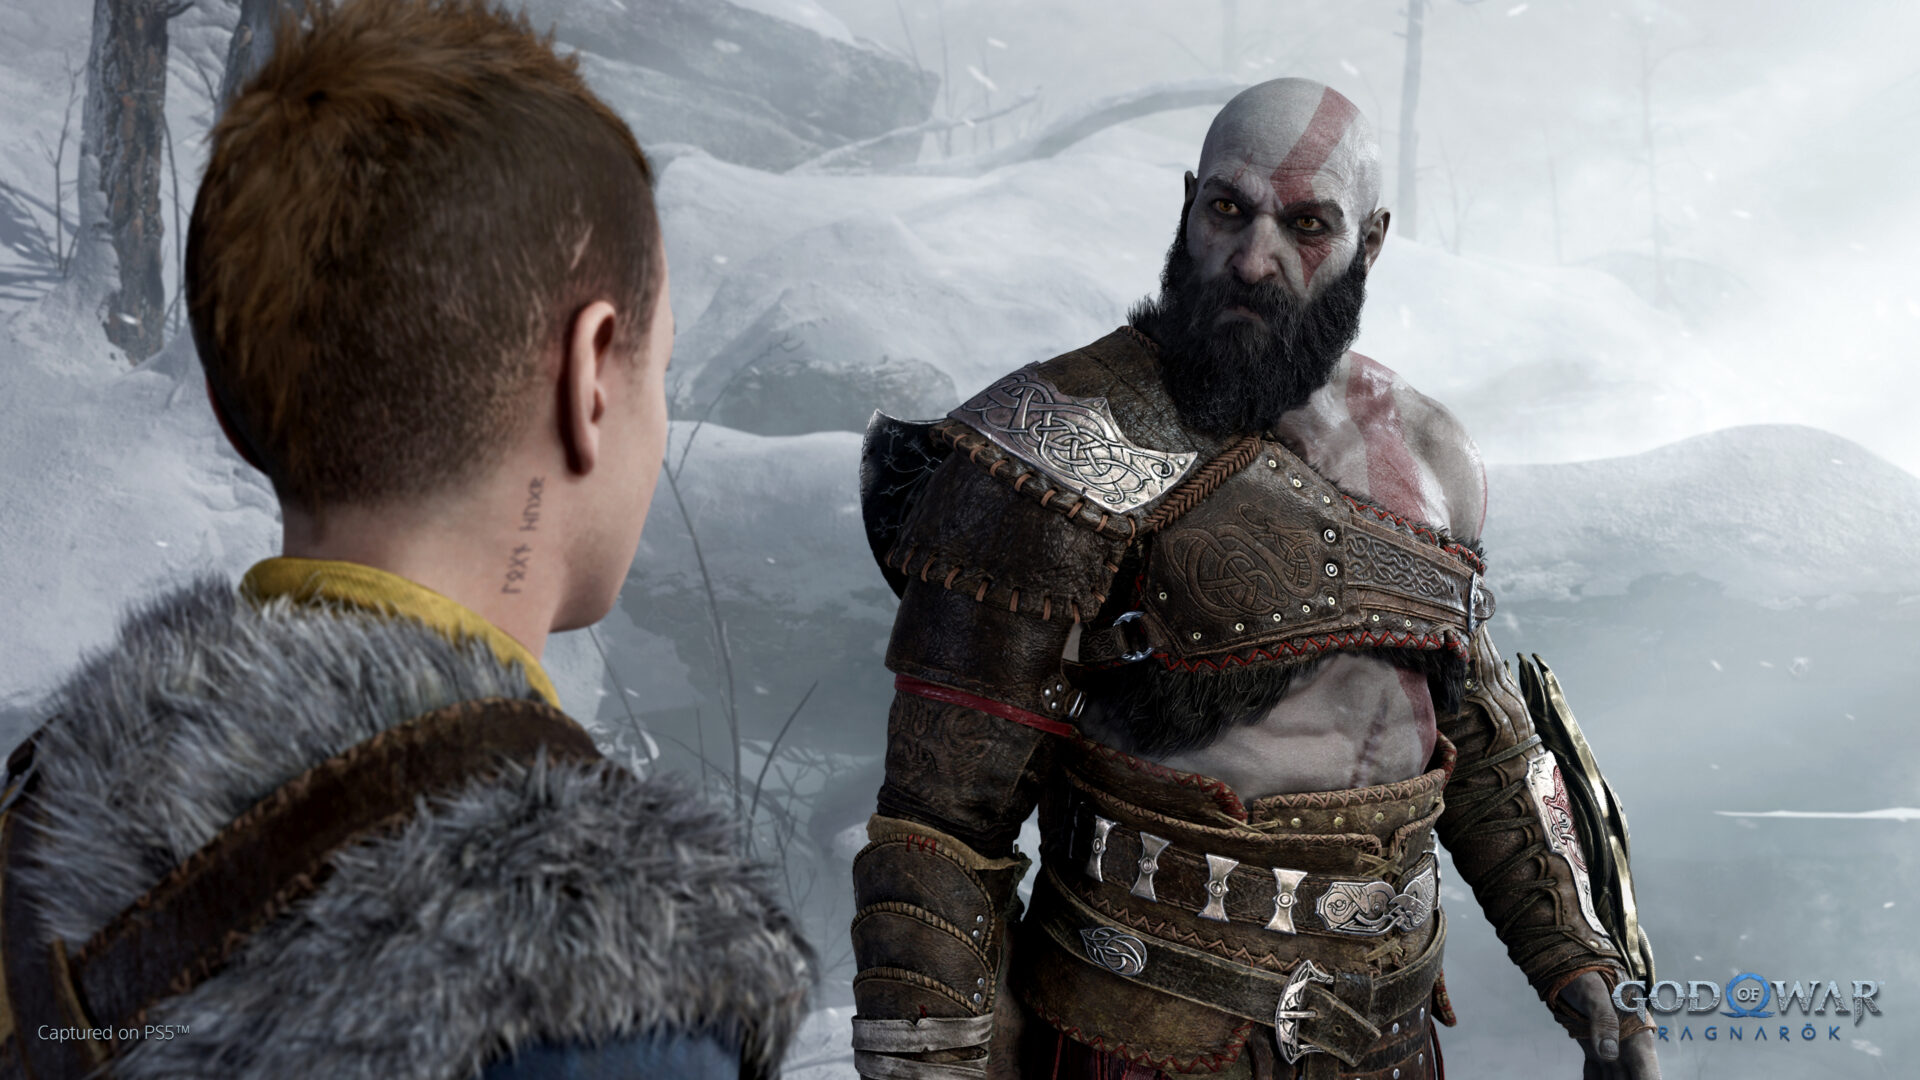 New God of War Ragnarök trailer will get you up to speed on the